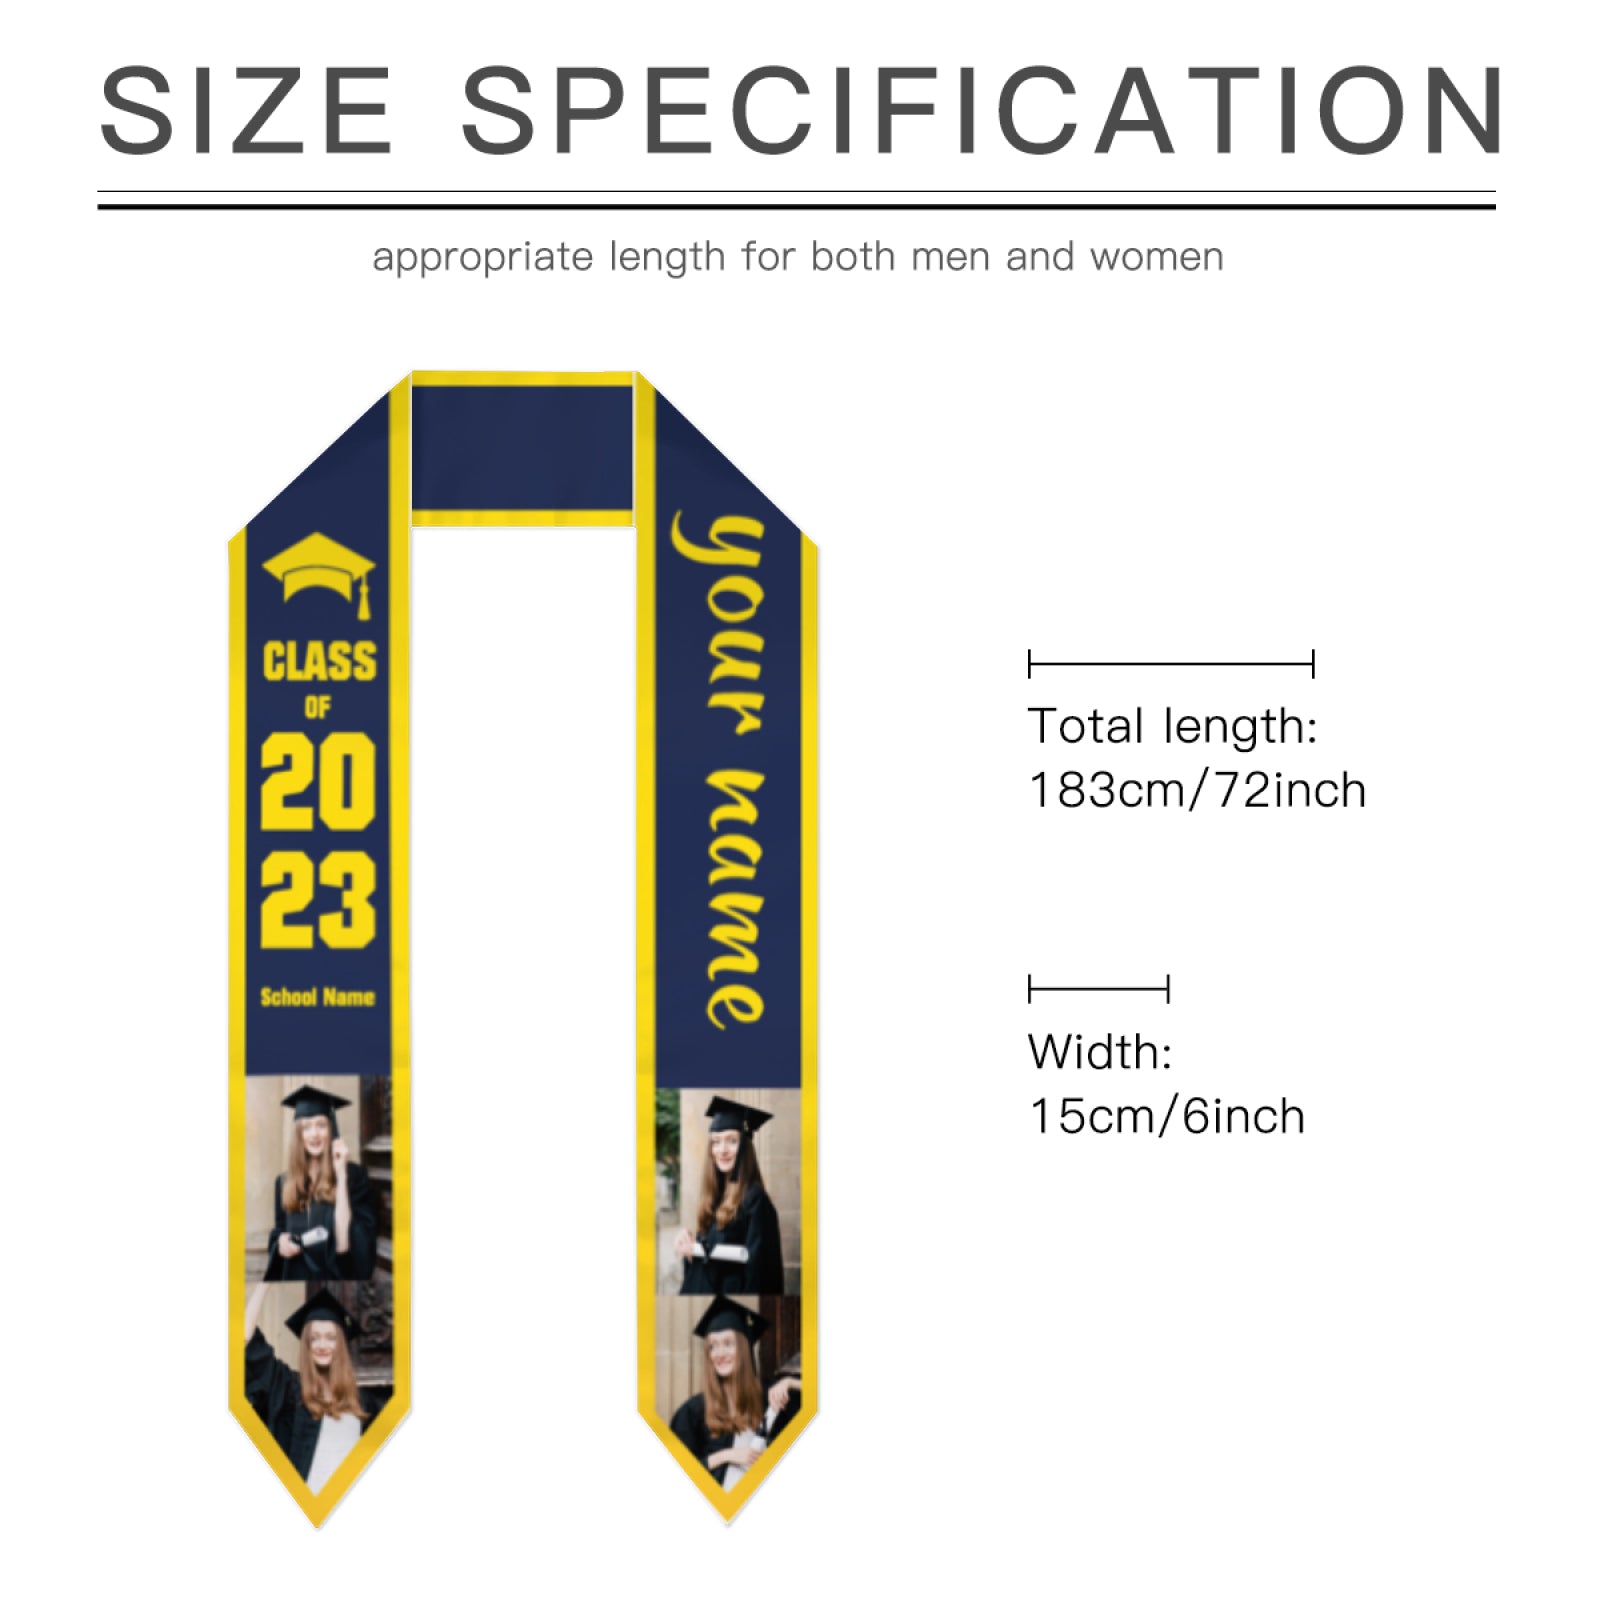 Class Of 2023 Best Gift For Graduation's Day - Upload Image - Personalized Graduation Stole - colorfulcustom